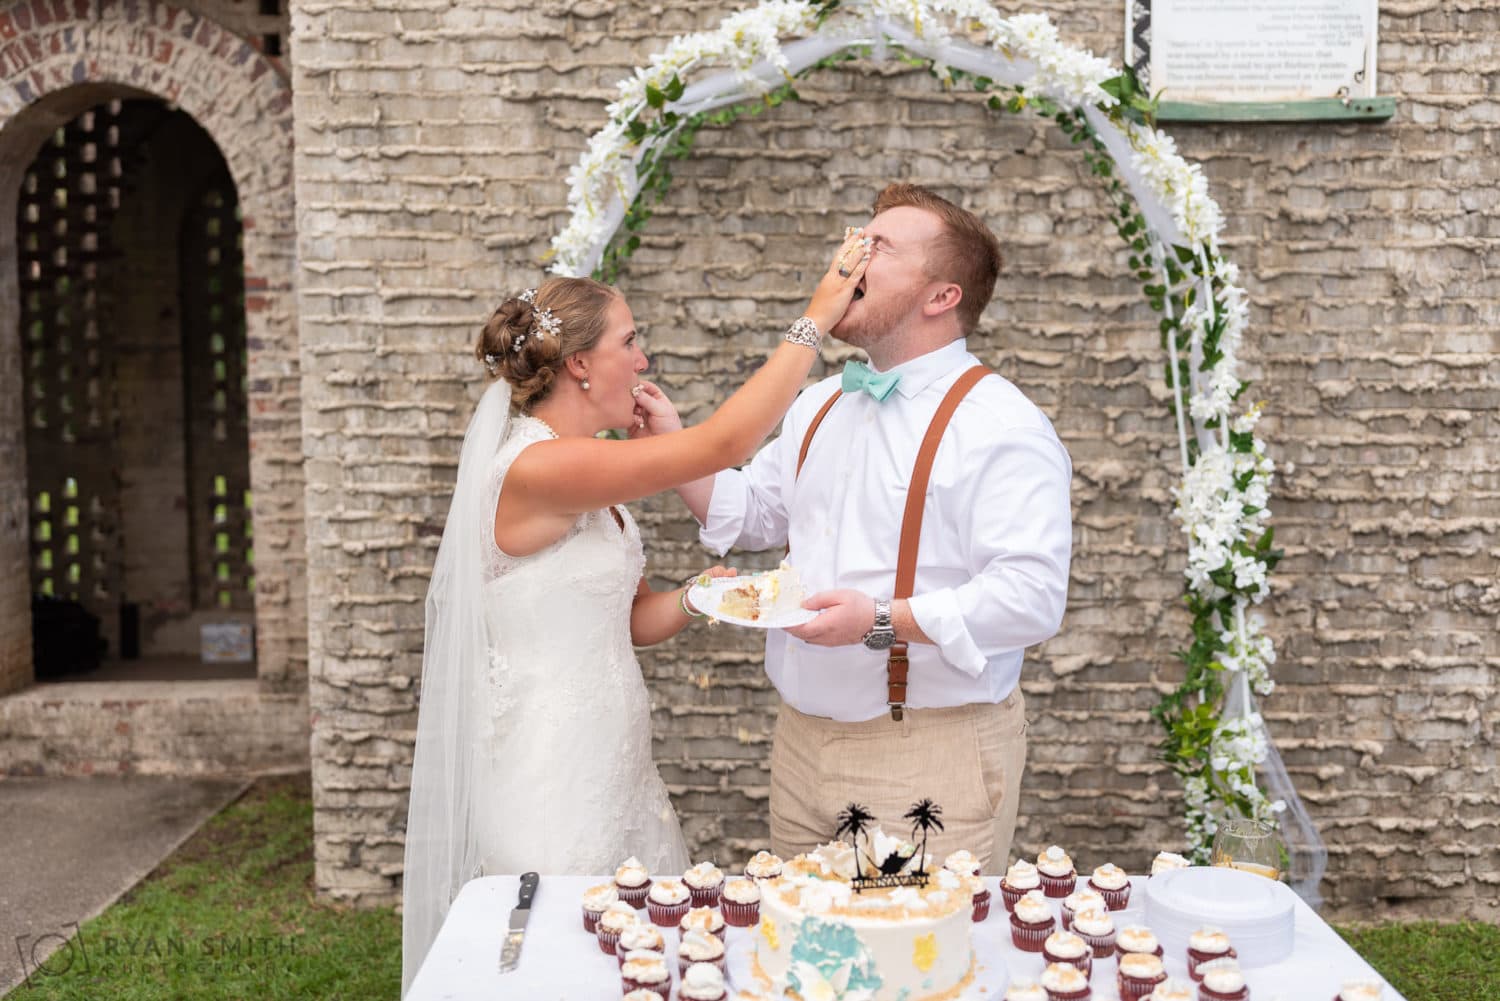 Bride smashing cake in the face of the groom - Atalaya Castle - Huntington Beach State Park